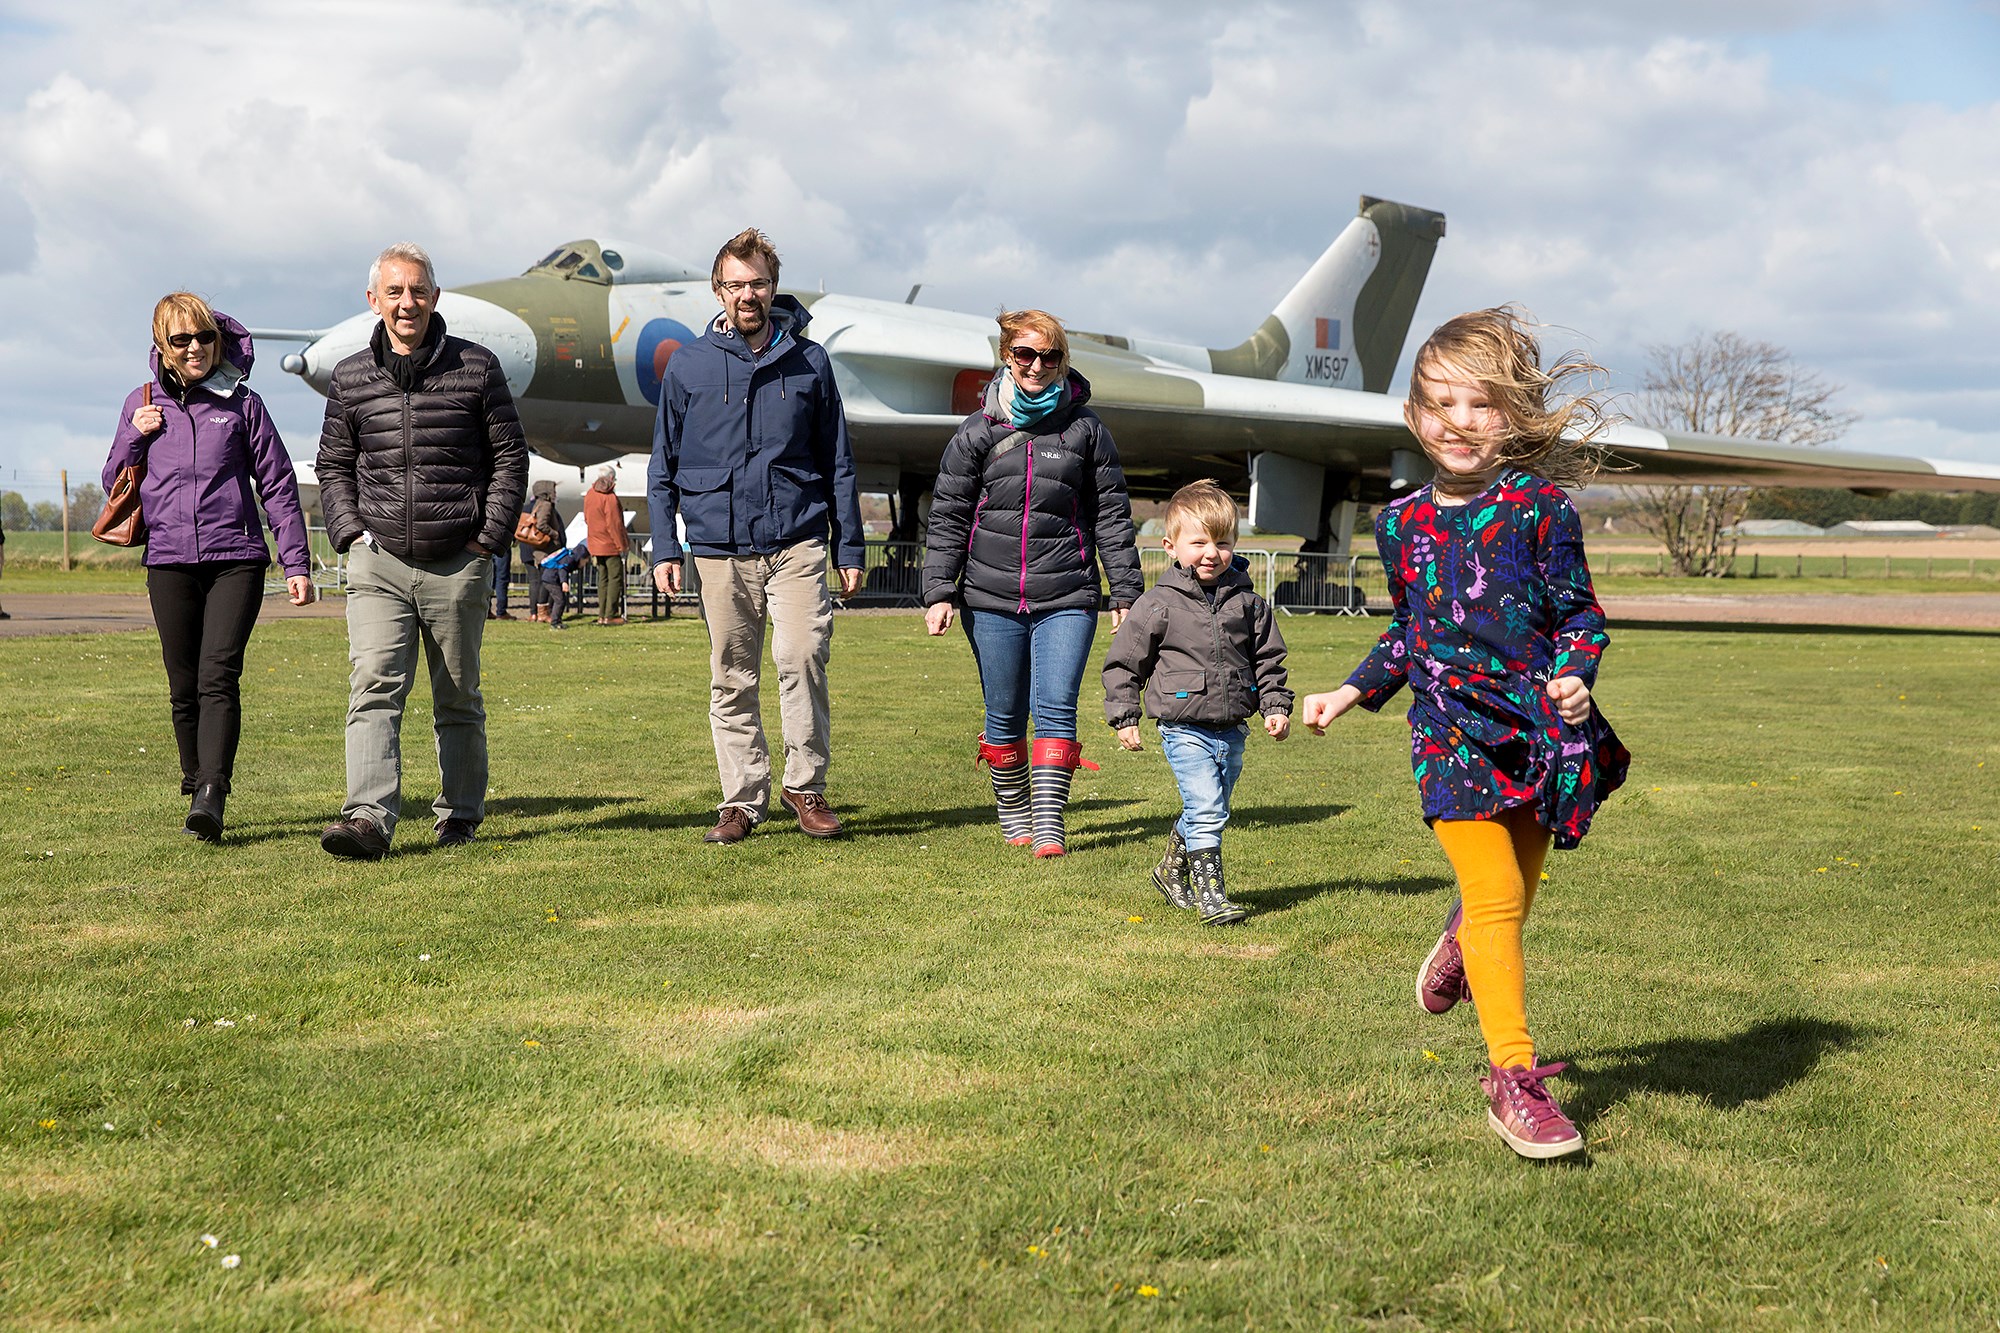 A family of six walking across a grassy field away from a large aircraft